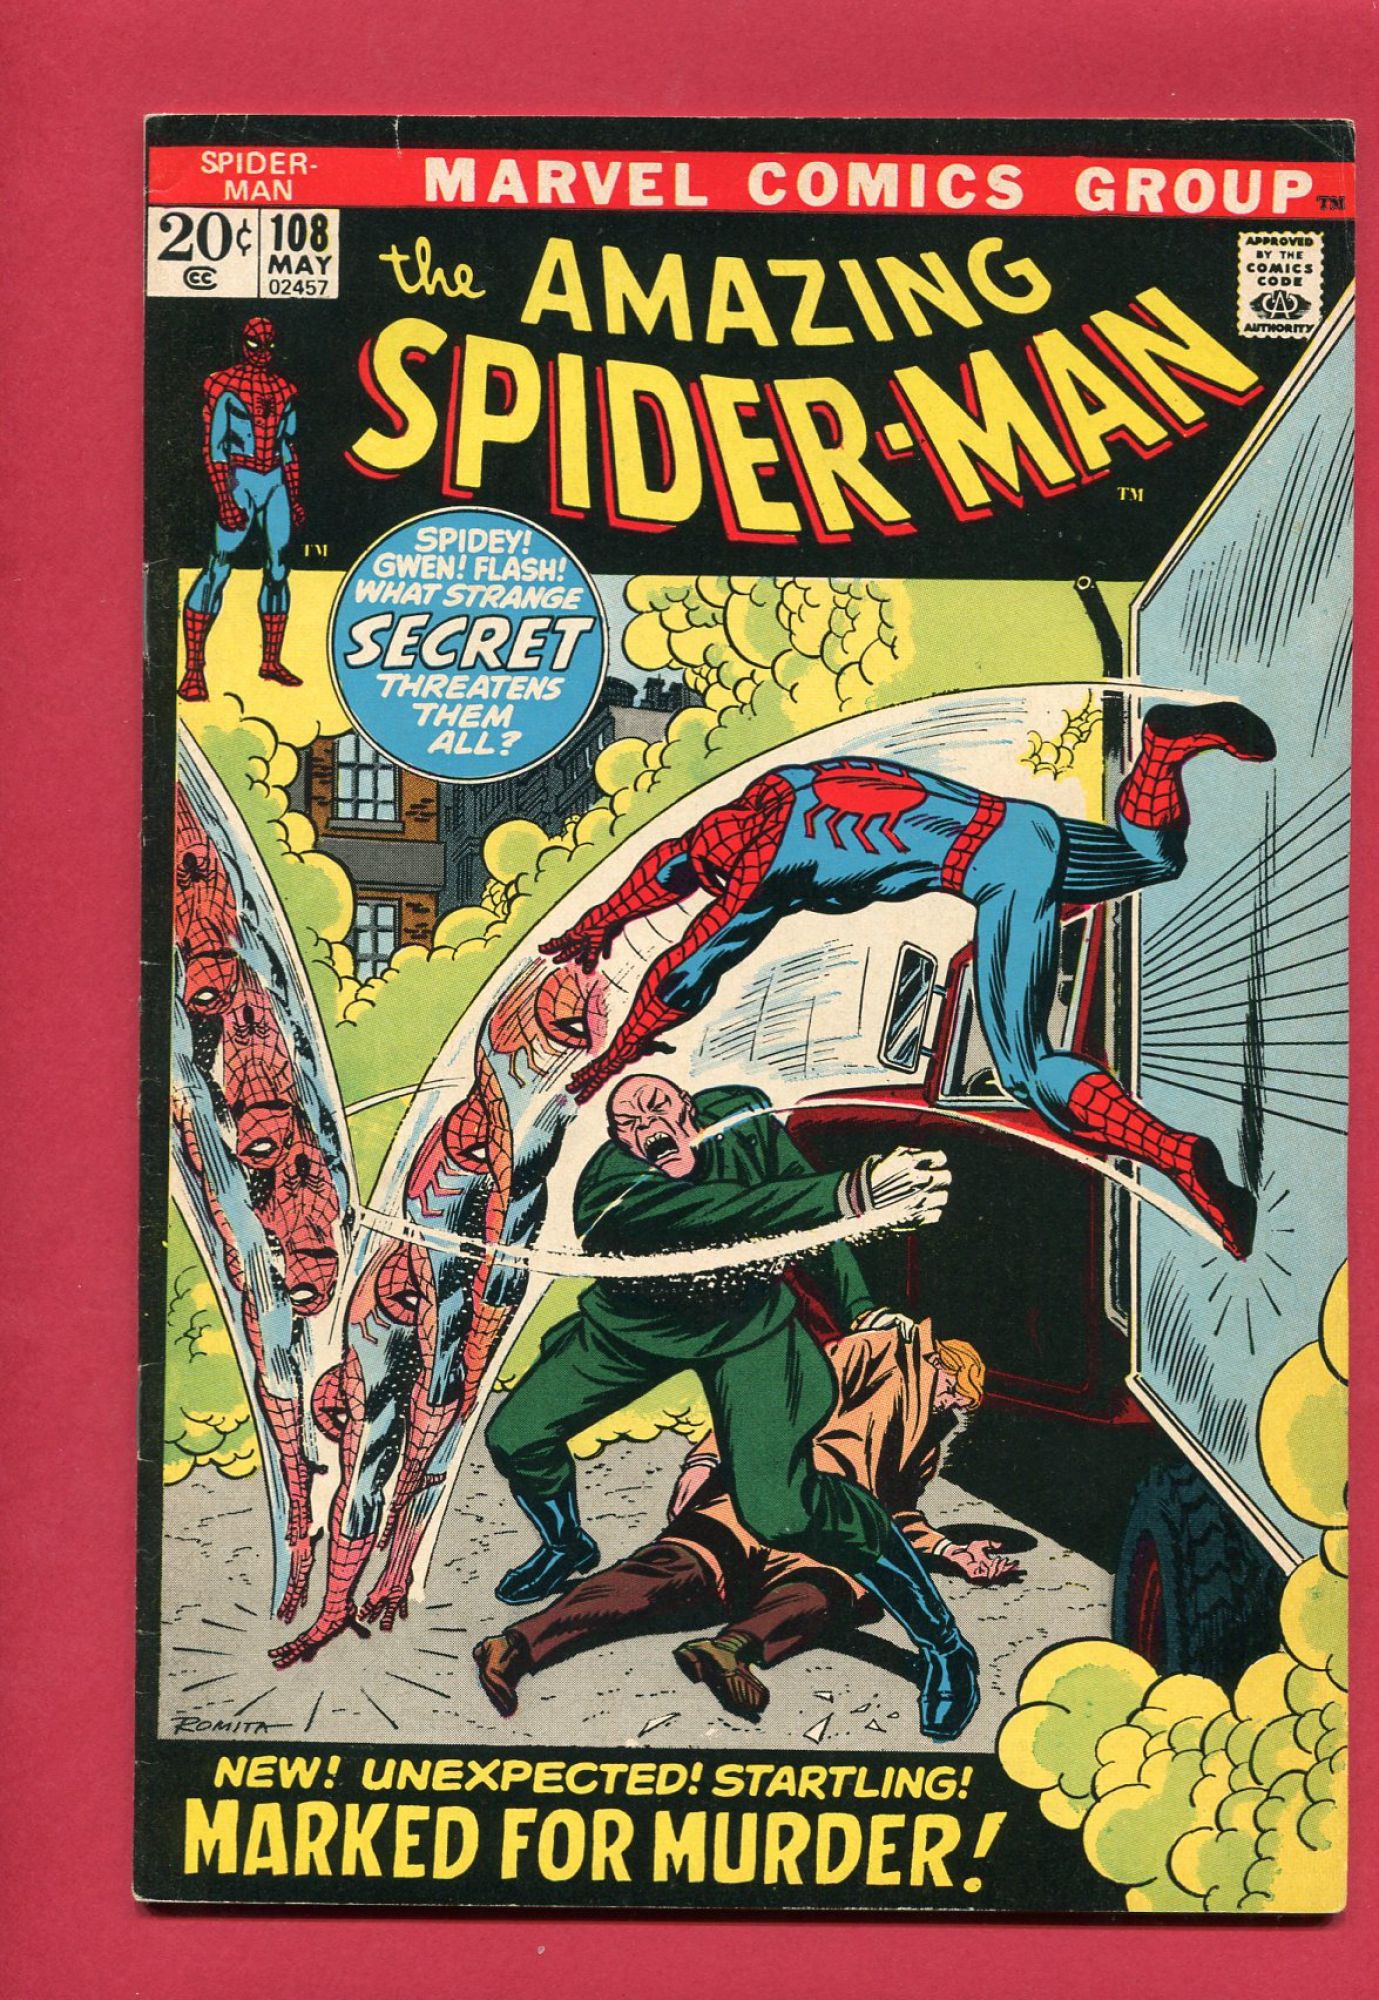 Amazing Spider-Man #108, May 1972, 5.5 FN-